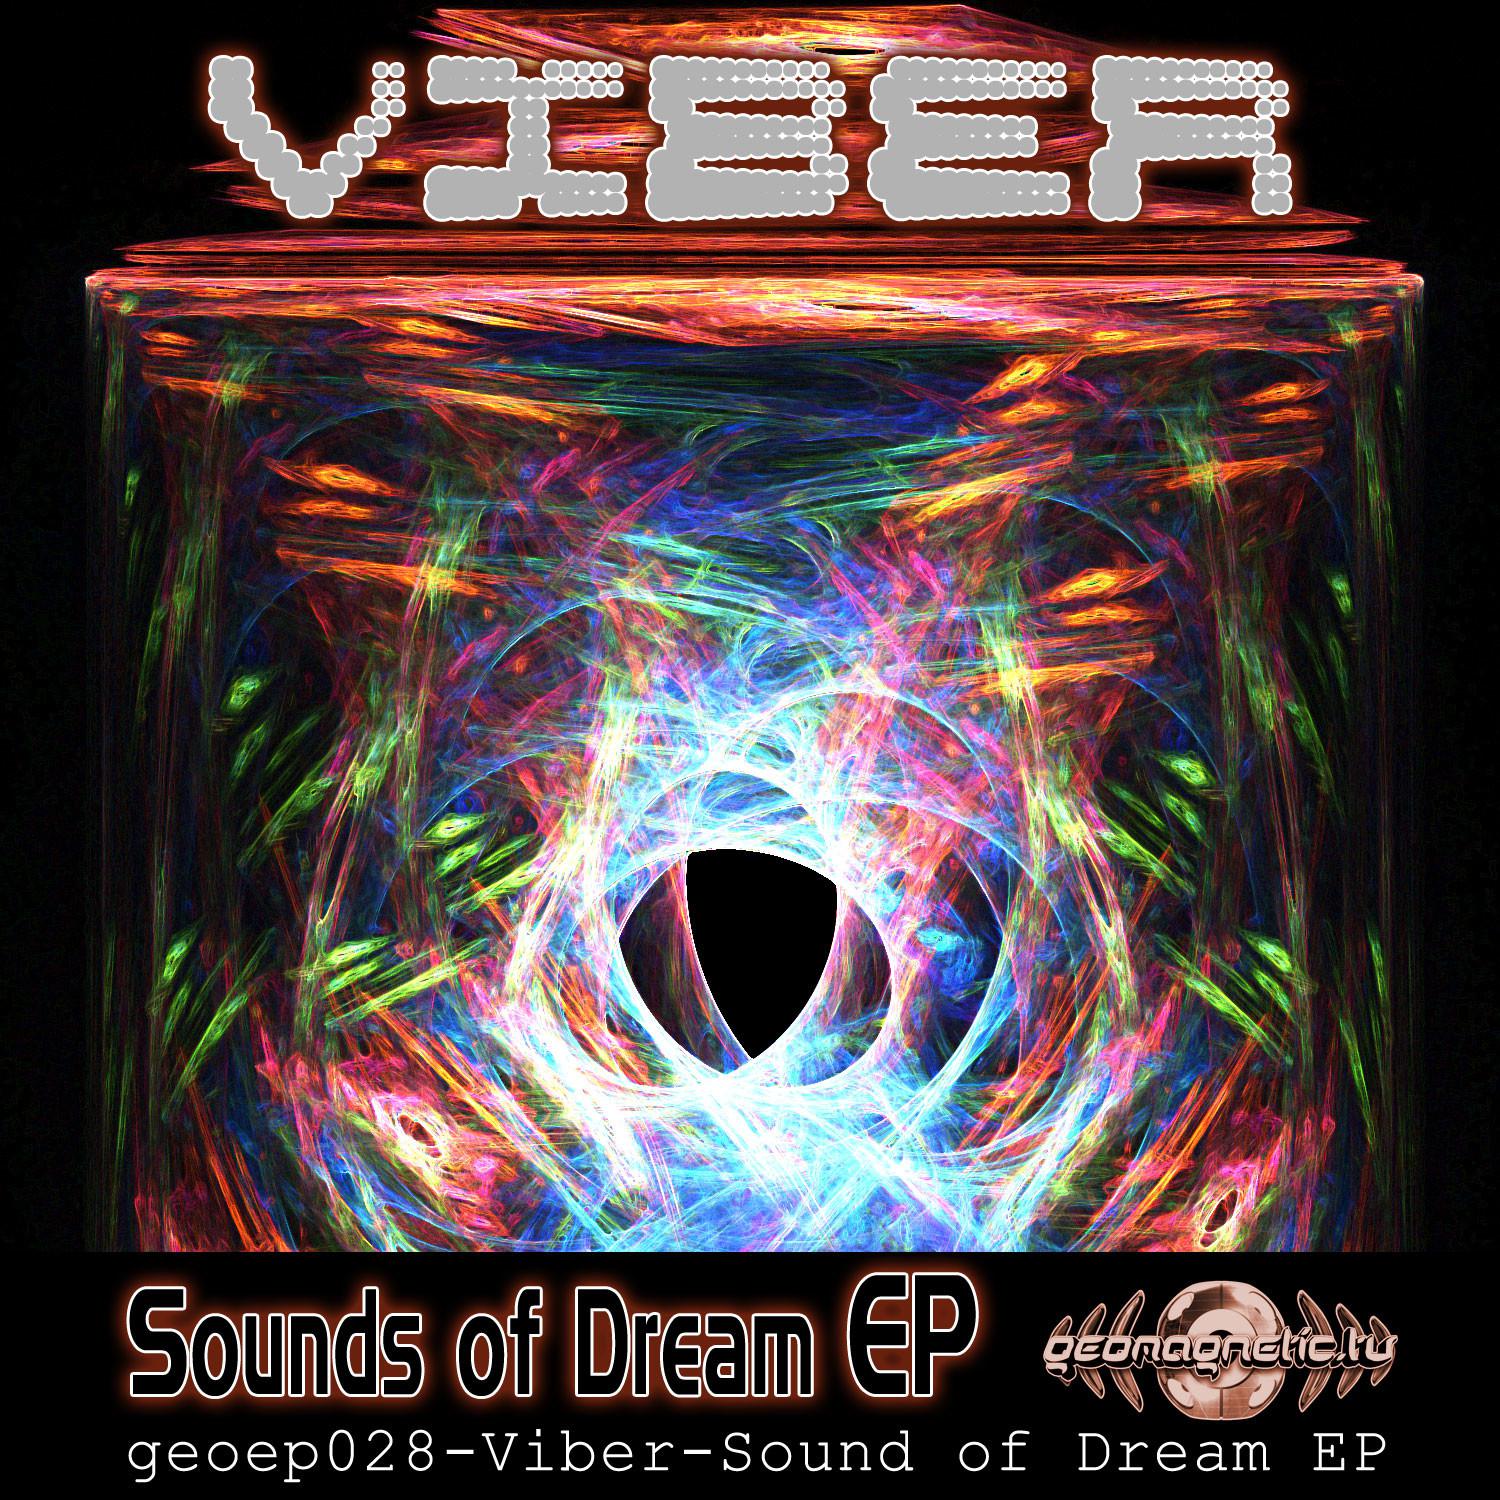 Viber-Sounds Of Dream EP